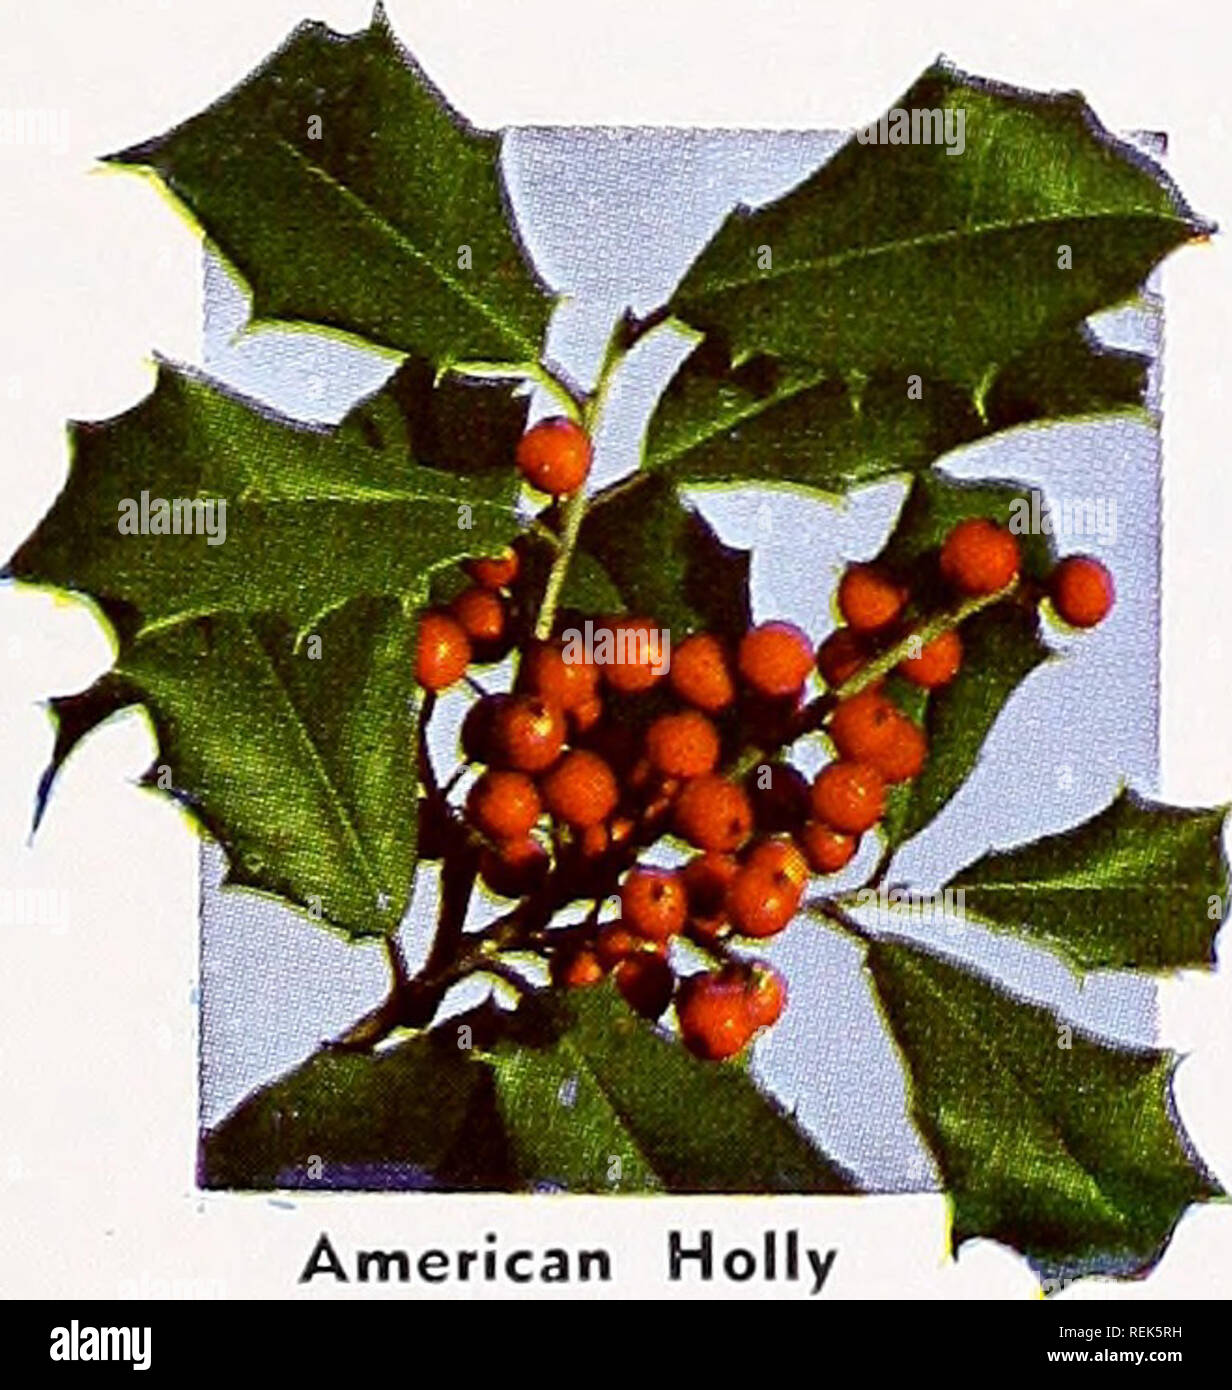 . C. M. Hobbs &amp; Sons. Nurseries Horticulture Catalogs; Evergreens Catalogs; Fruit trees Catalogs; Climbing plants Catalogs; Shrubs Catalogs; Vegetables Catalogs. Ilex Rotundifolia MAHONIA This plant slightly resembles American Holly with its rich glossy green leaves. Blooms are yellow in early summer followed by dark blue berries. The leaves turn a bronze in the fall and remain most of the winter. Valuable plant for use with ever- greens. MYRICA MYRICA Pennsylvania (Northern Bayberry). Dark glossy, aromatic, semi evergreen foliage. Waxy blue-gray berries in fall and winter. PIERIS PIERIS J Stock Photo